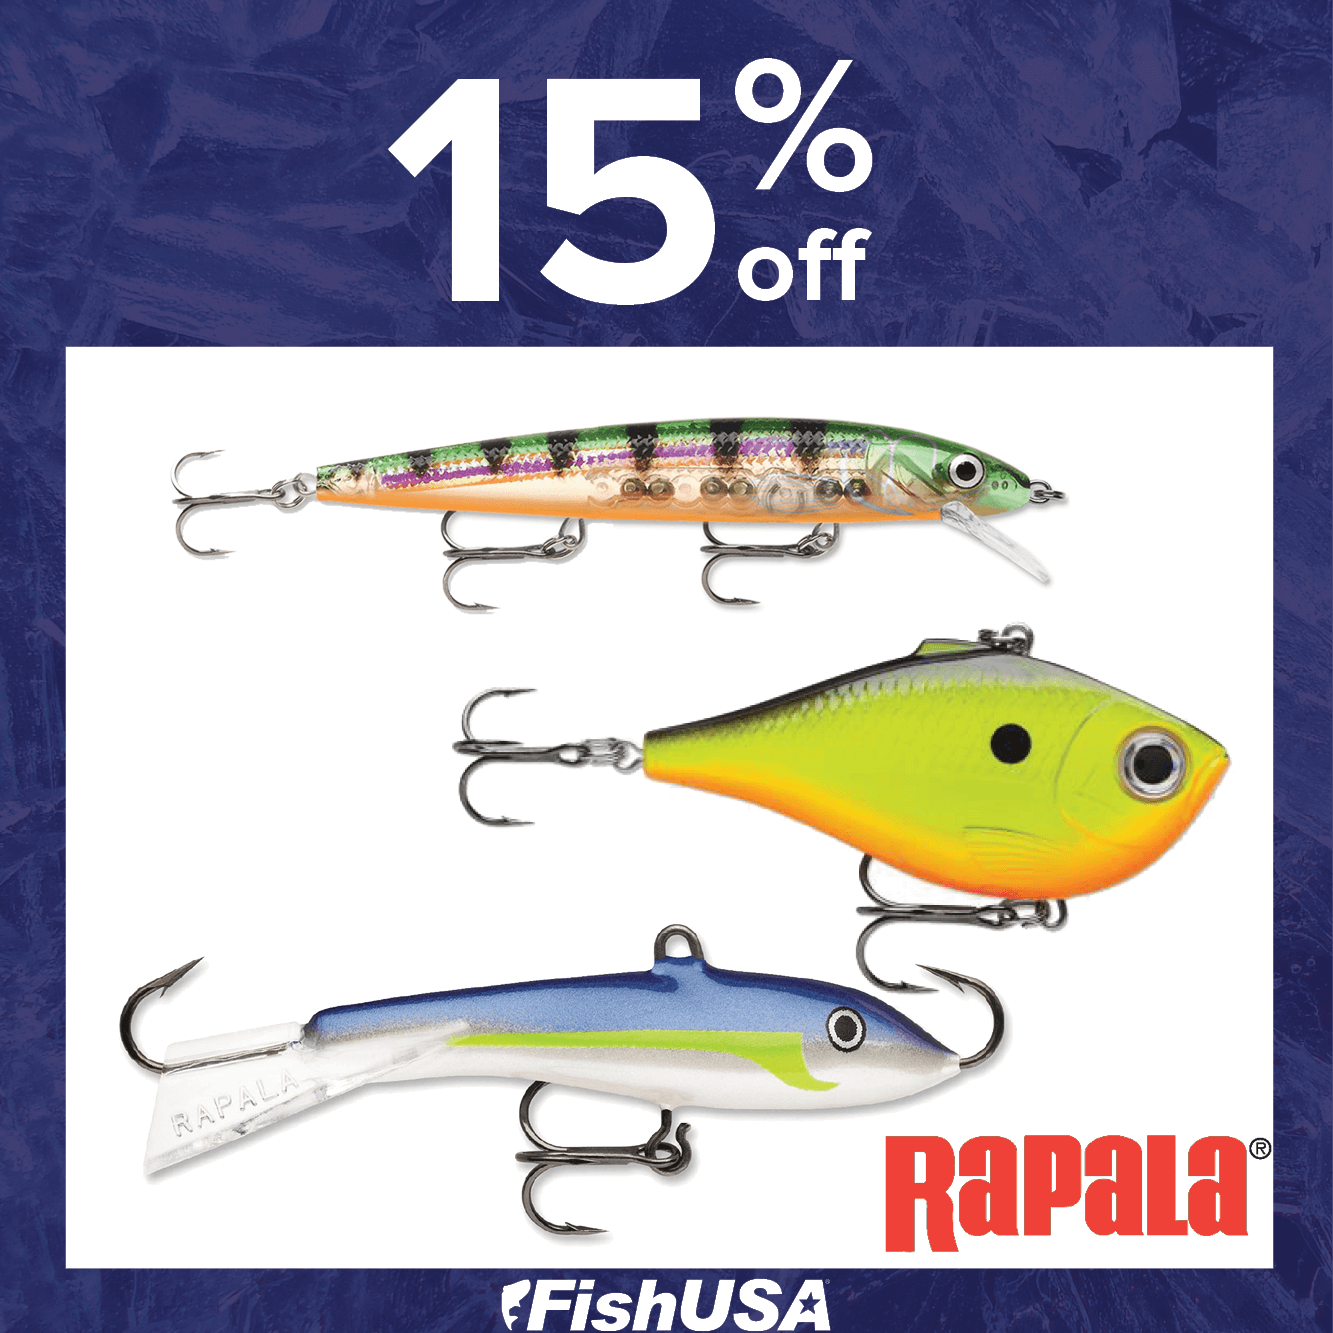 15% off Rapala Lures